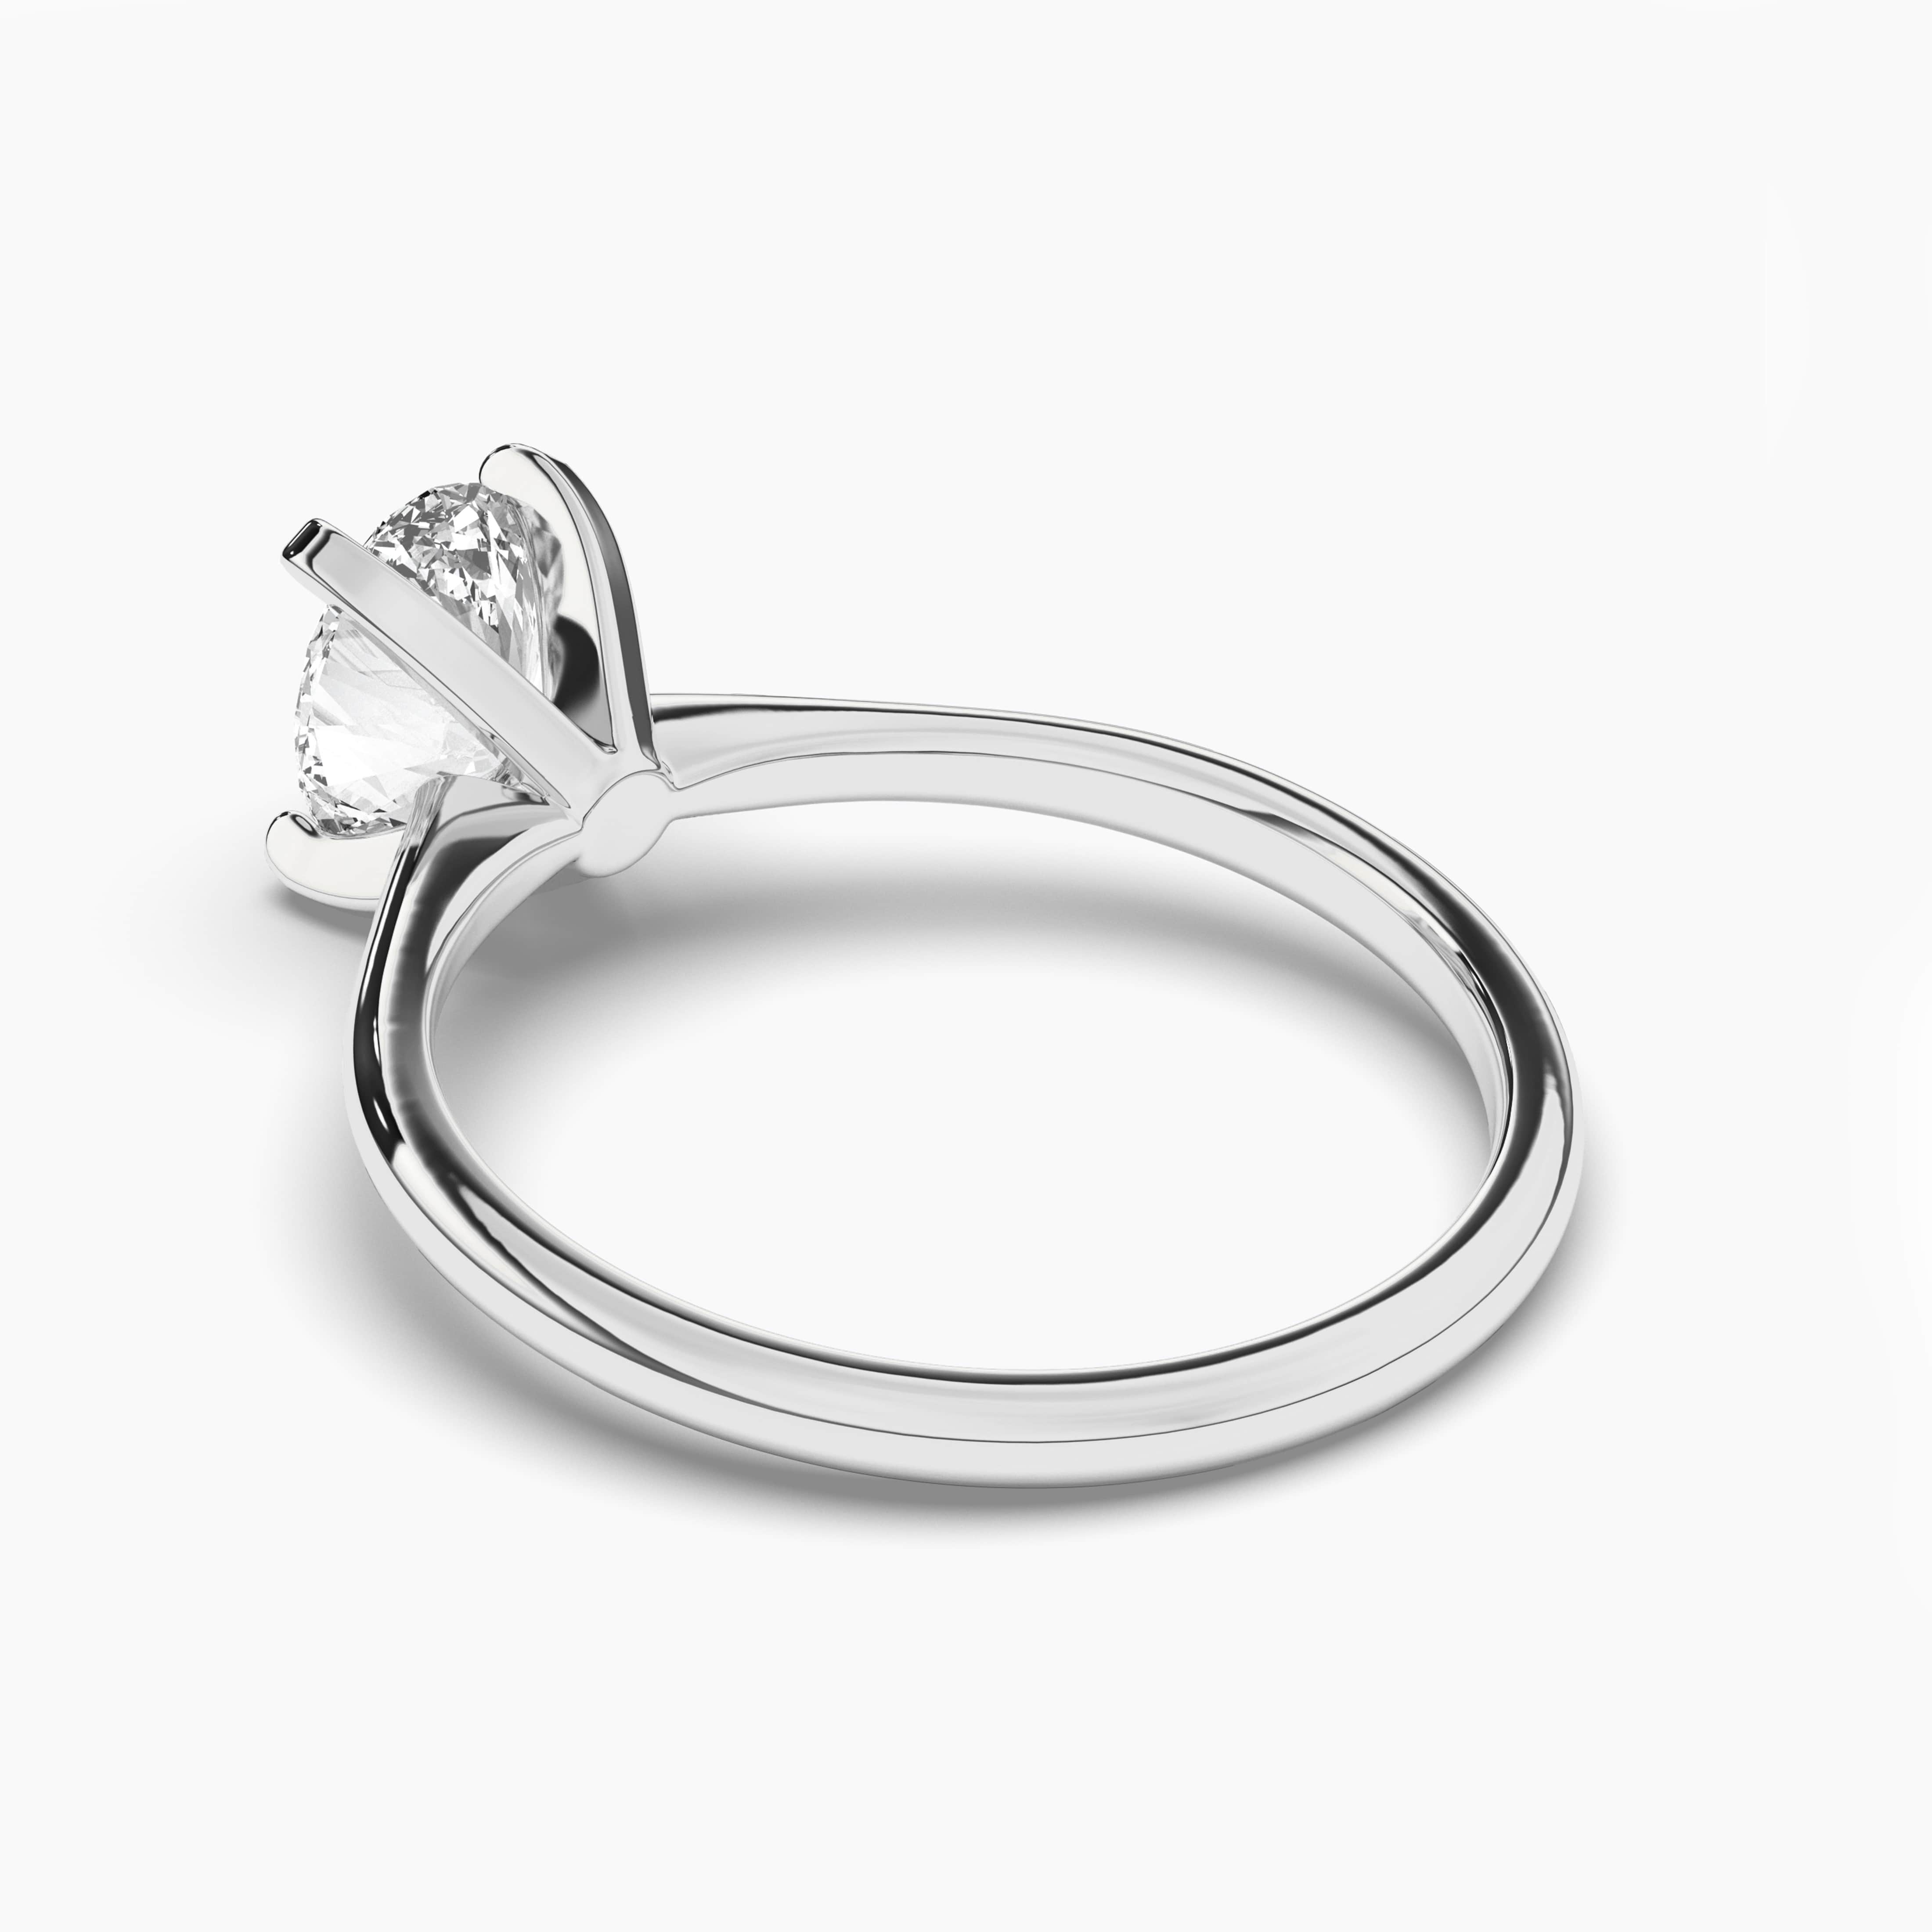 Oval Diamond Solitaire Engagement Ring in White Gold 